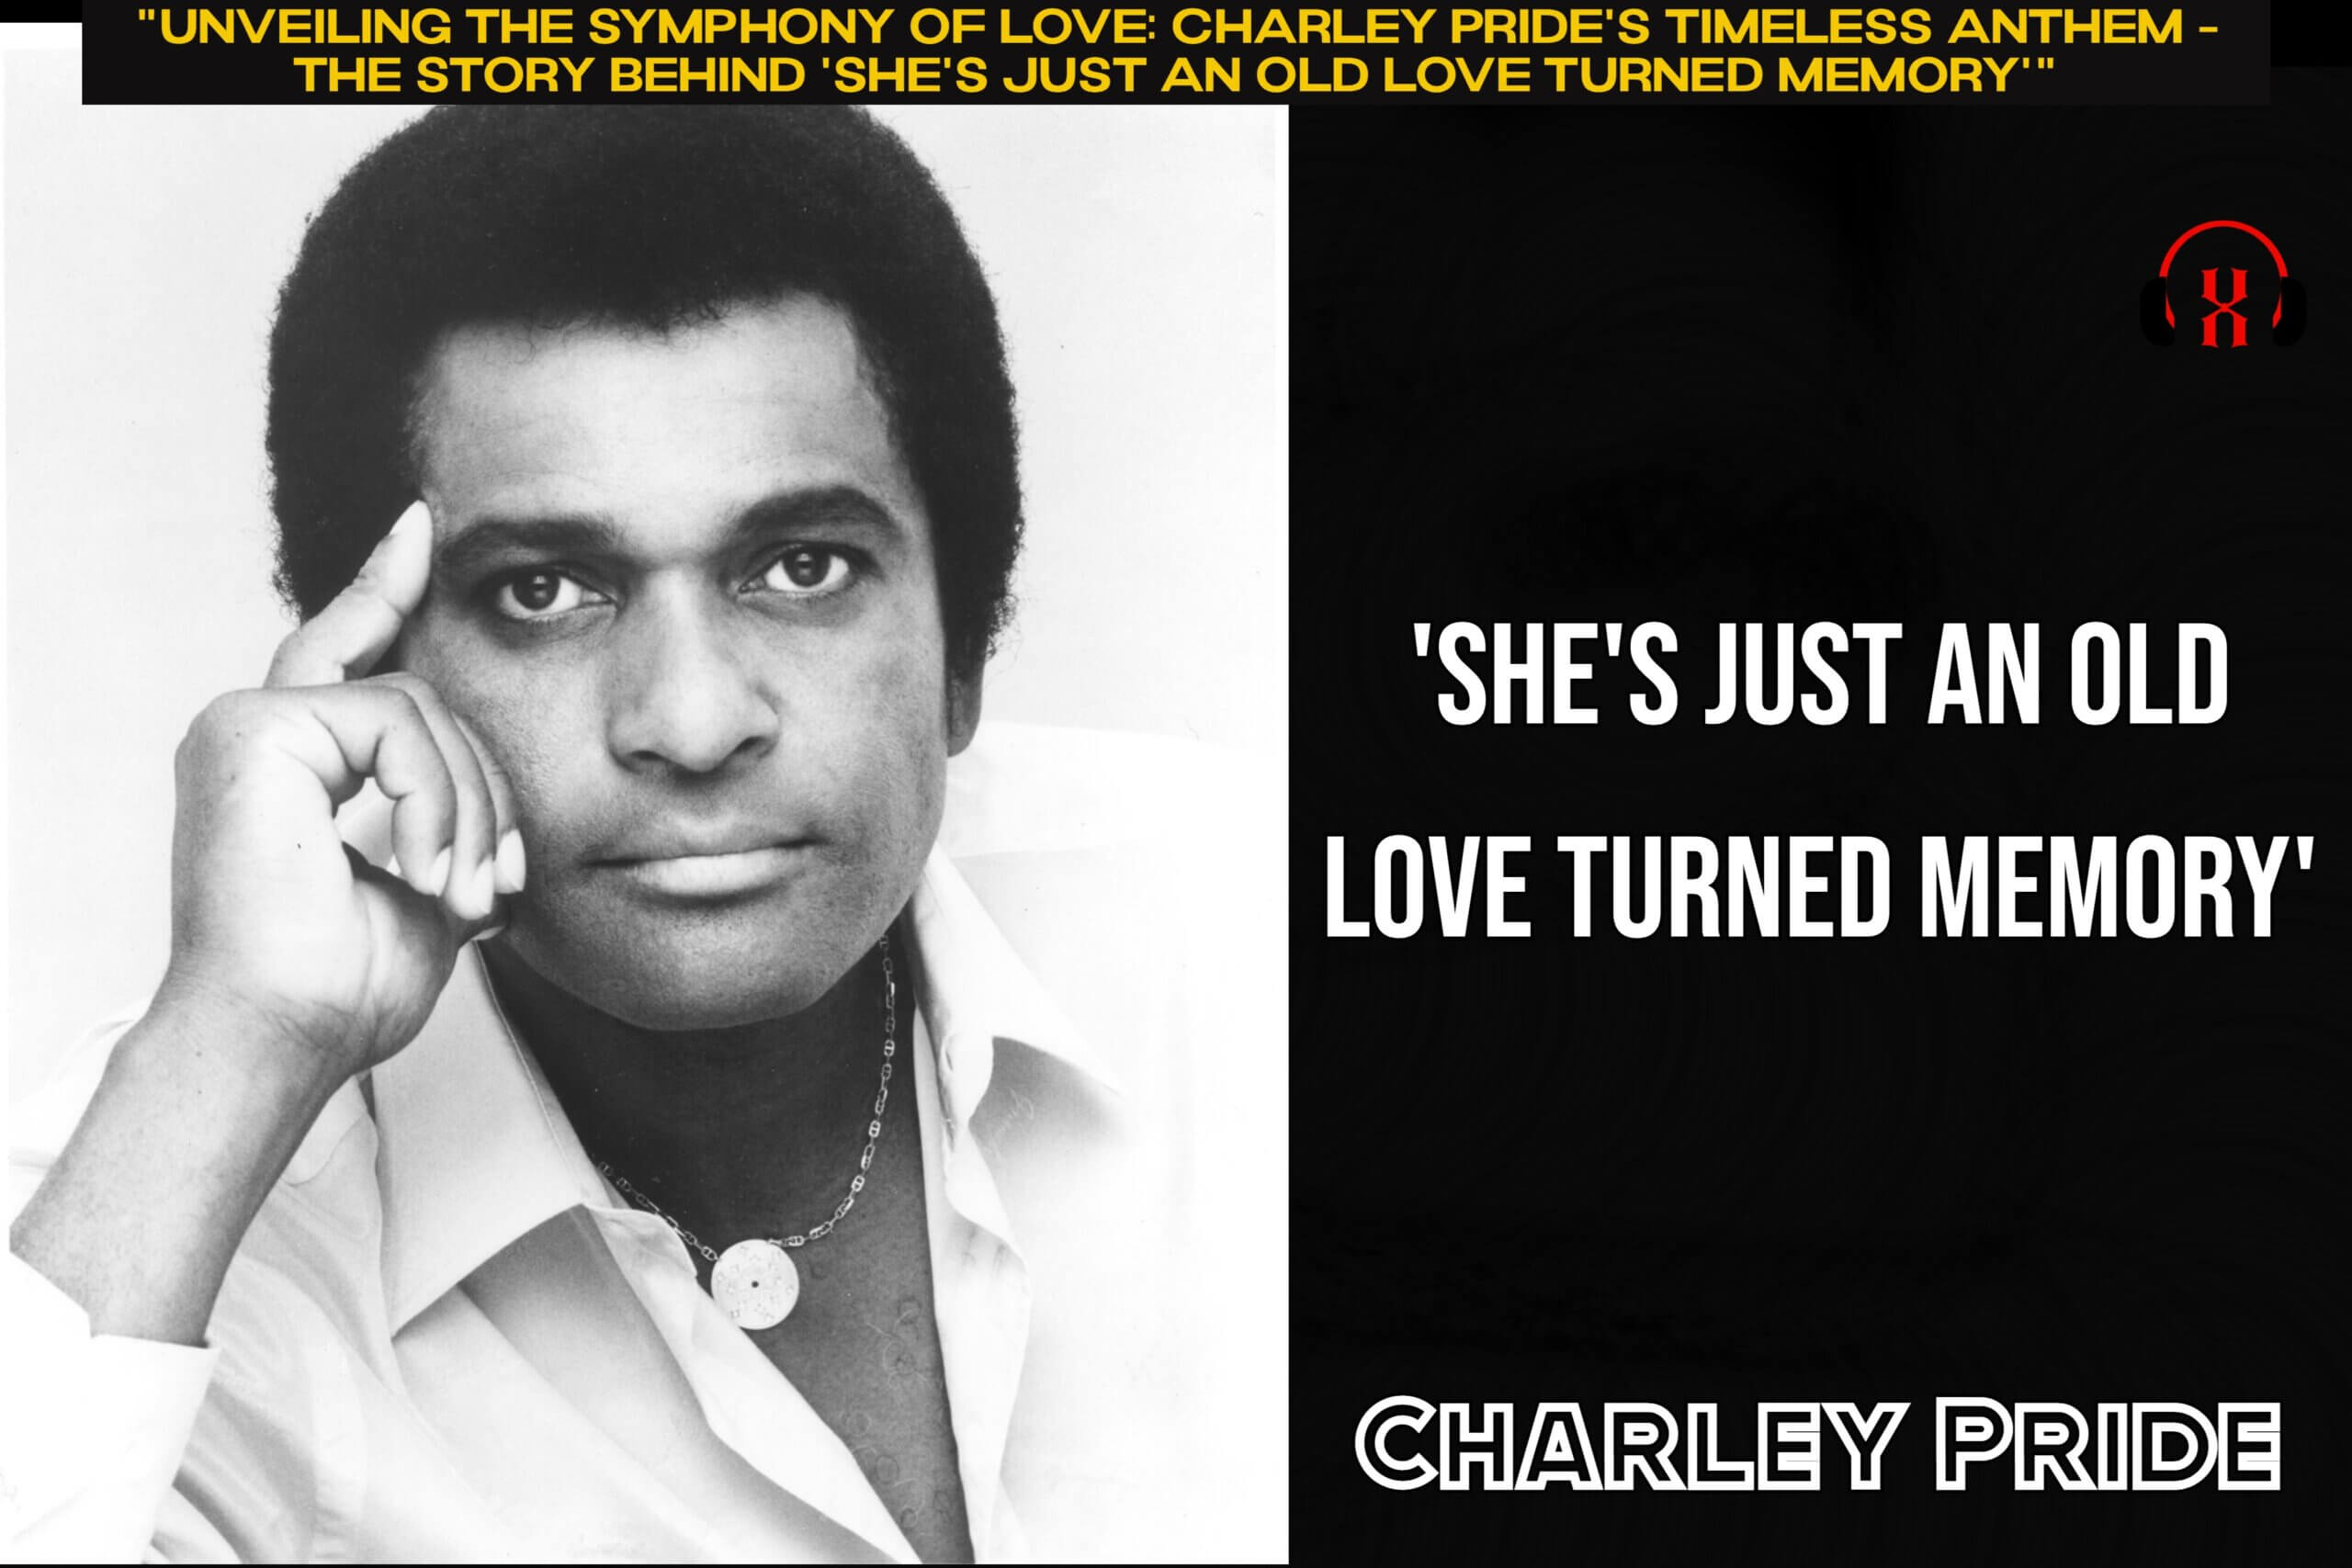 "Unveiling the Symphony of Love: Charley Pride's Timeless Anthem - The Story Behind 'She's Just an Old Love Turned Memory'"